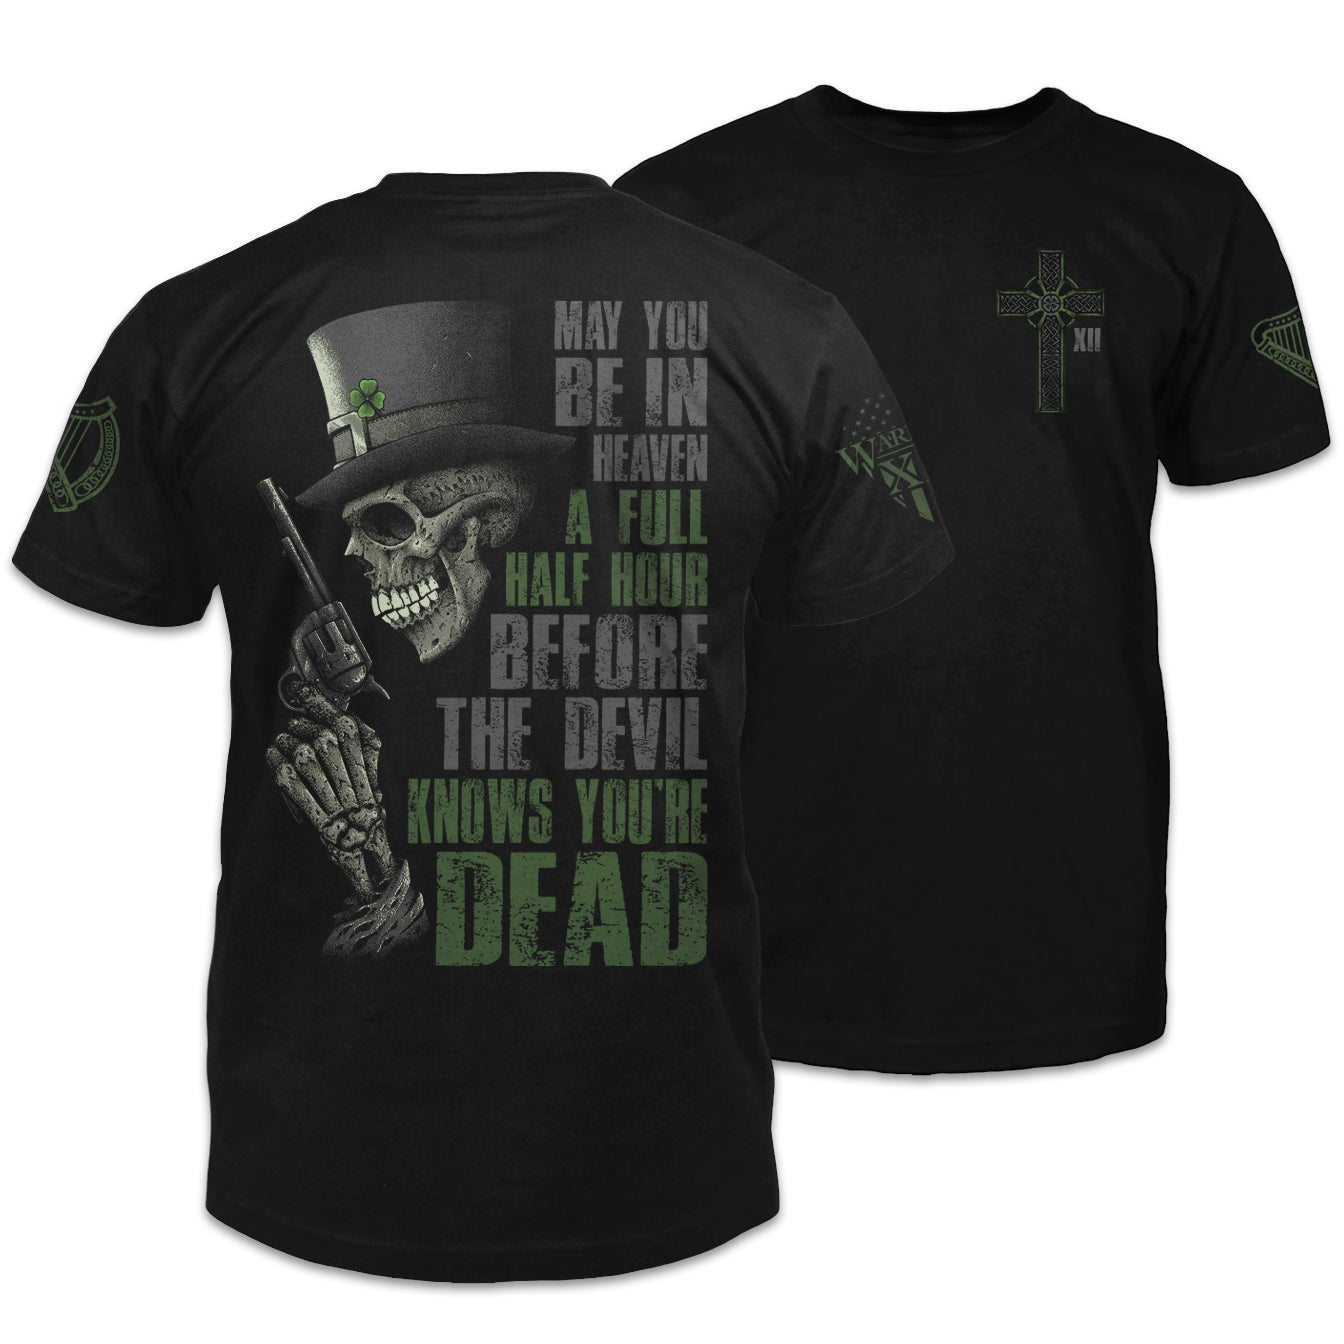 Front & back black t-shirt with the words "May you be in heaven a full half hour before the devil knows you're dead" with a side on view of a skeleton holding a pistol printed on the shirt.